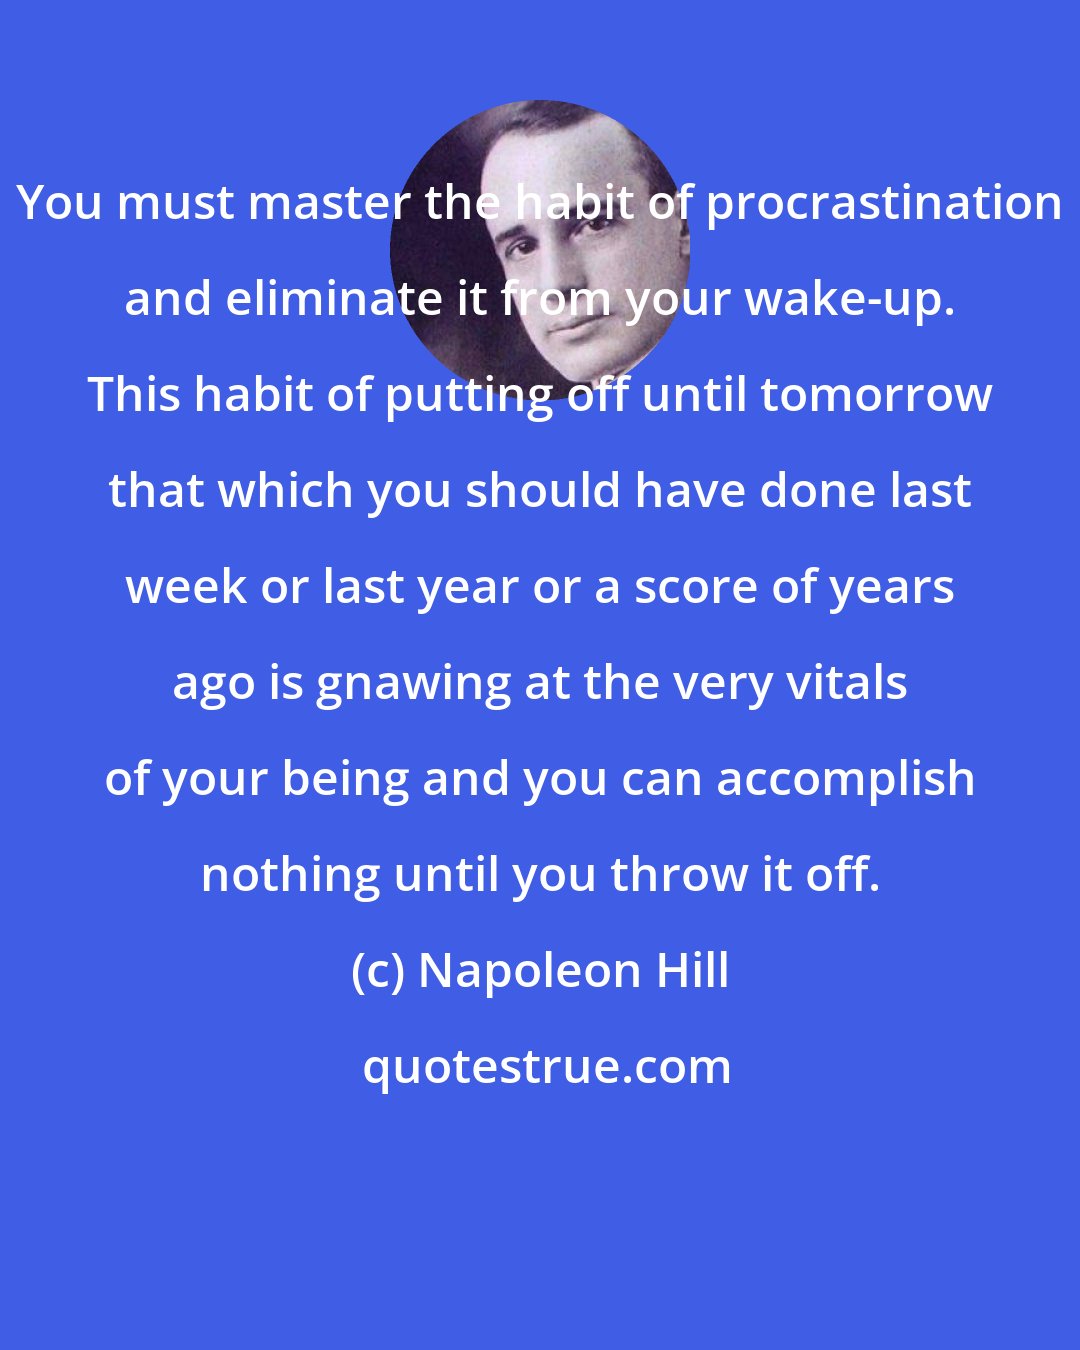 Napoleon Hill: You must master the habit of procrastination and eliminate it from your wake-up. This habit of putting off until tomorrow that which you should have done last week or last year or a score of years ago is gnawing at the very vitals of your being and you can accomplish nothing until you throw it off.